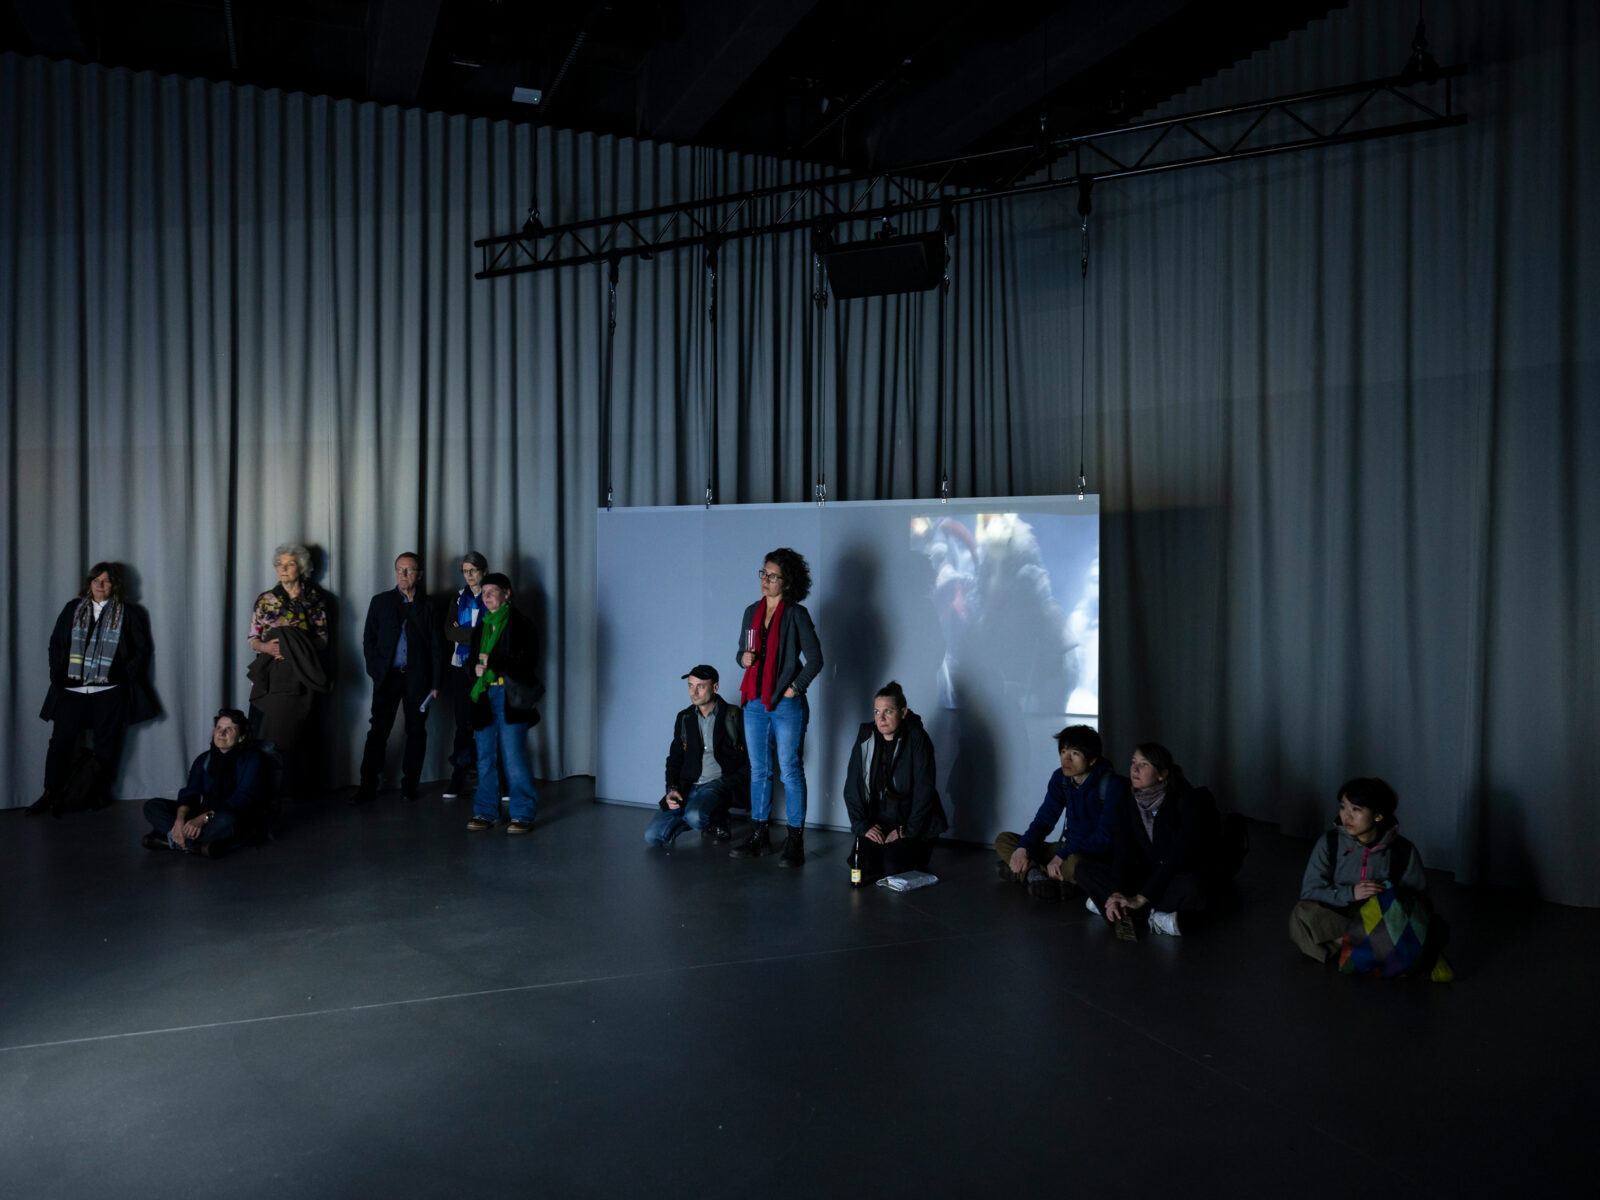 Visitors stand in a darkened room watching Clément Cogitore's films on huge displays.